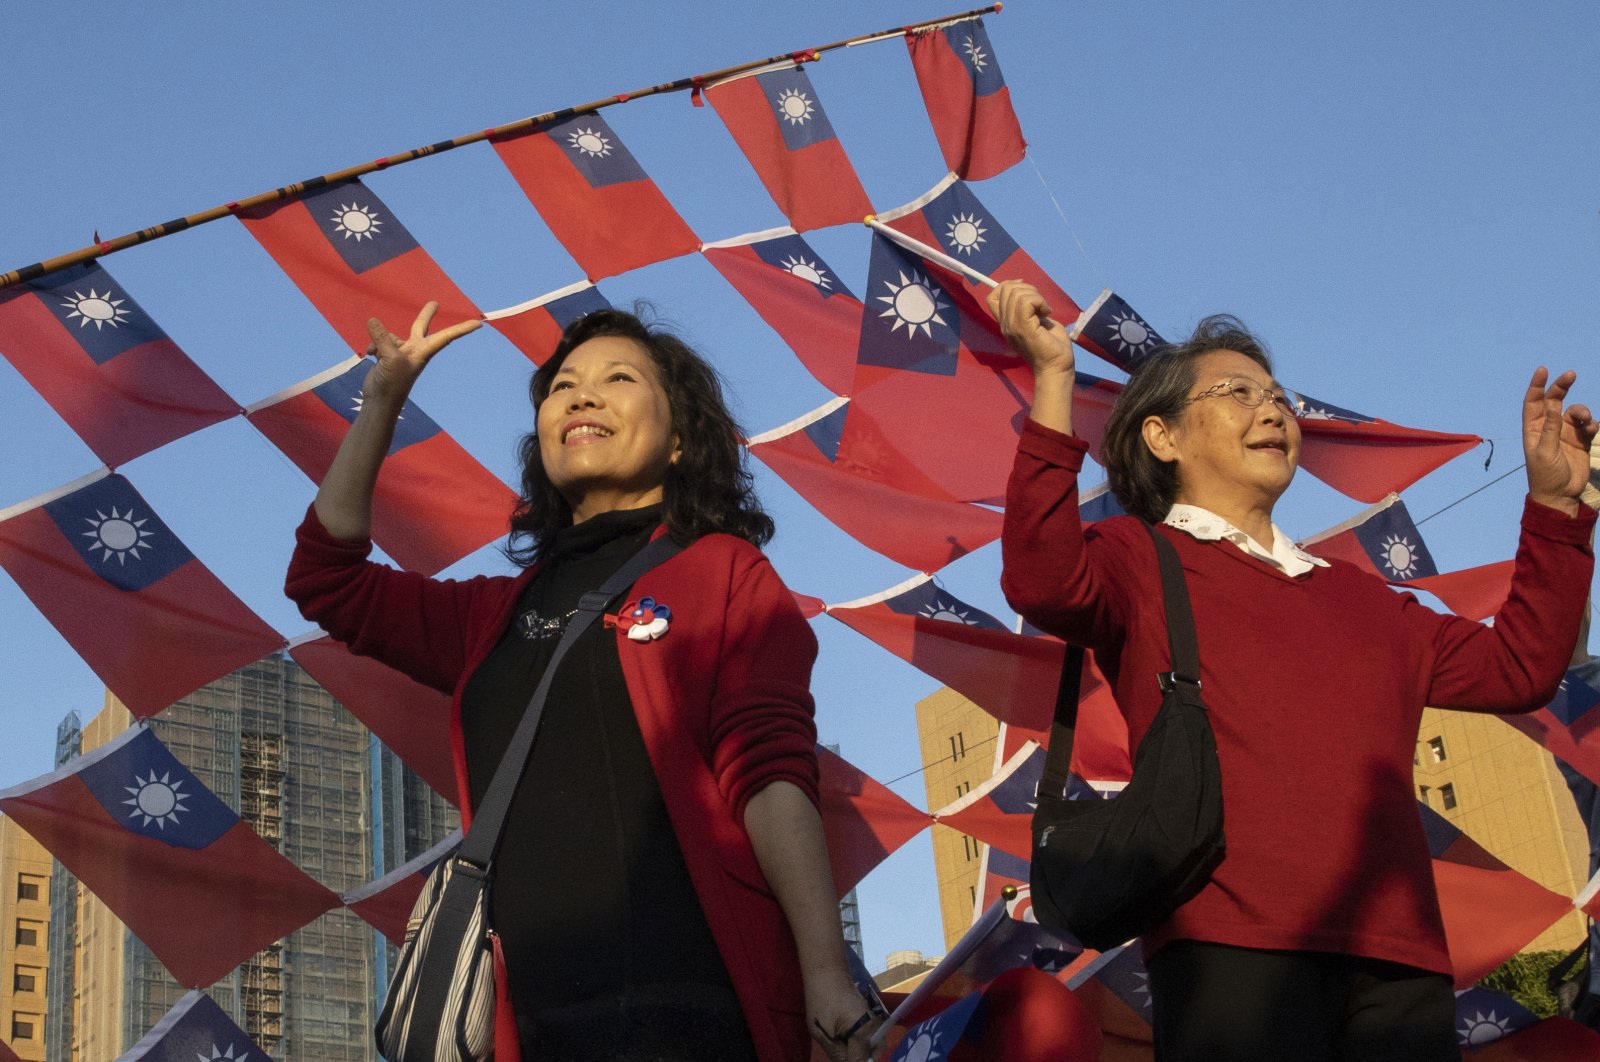 Supporters of the Nationalist or KMT party pose with the Taiwanese flag during a rally for the presidential election in Taipei, Taiwan, Jan. 9, 2020. (AP Photo)